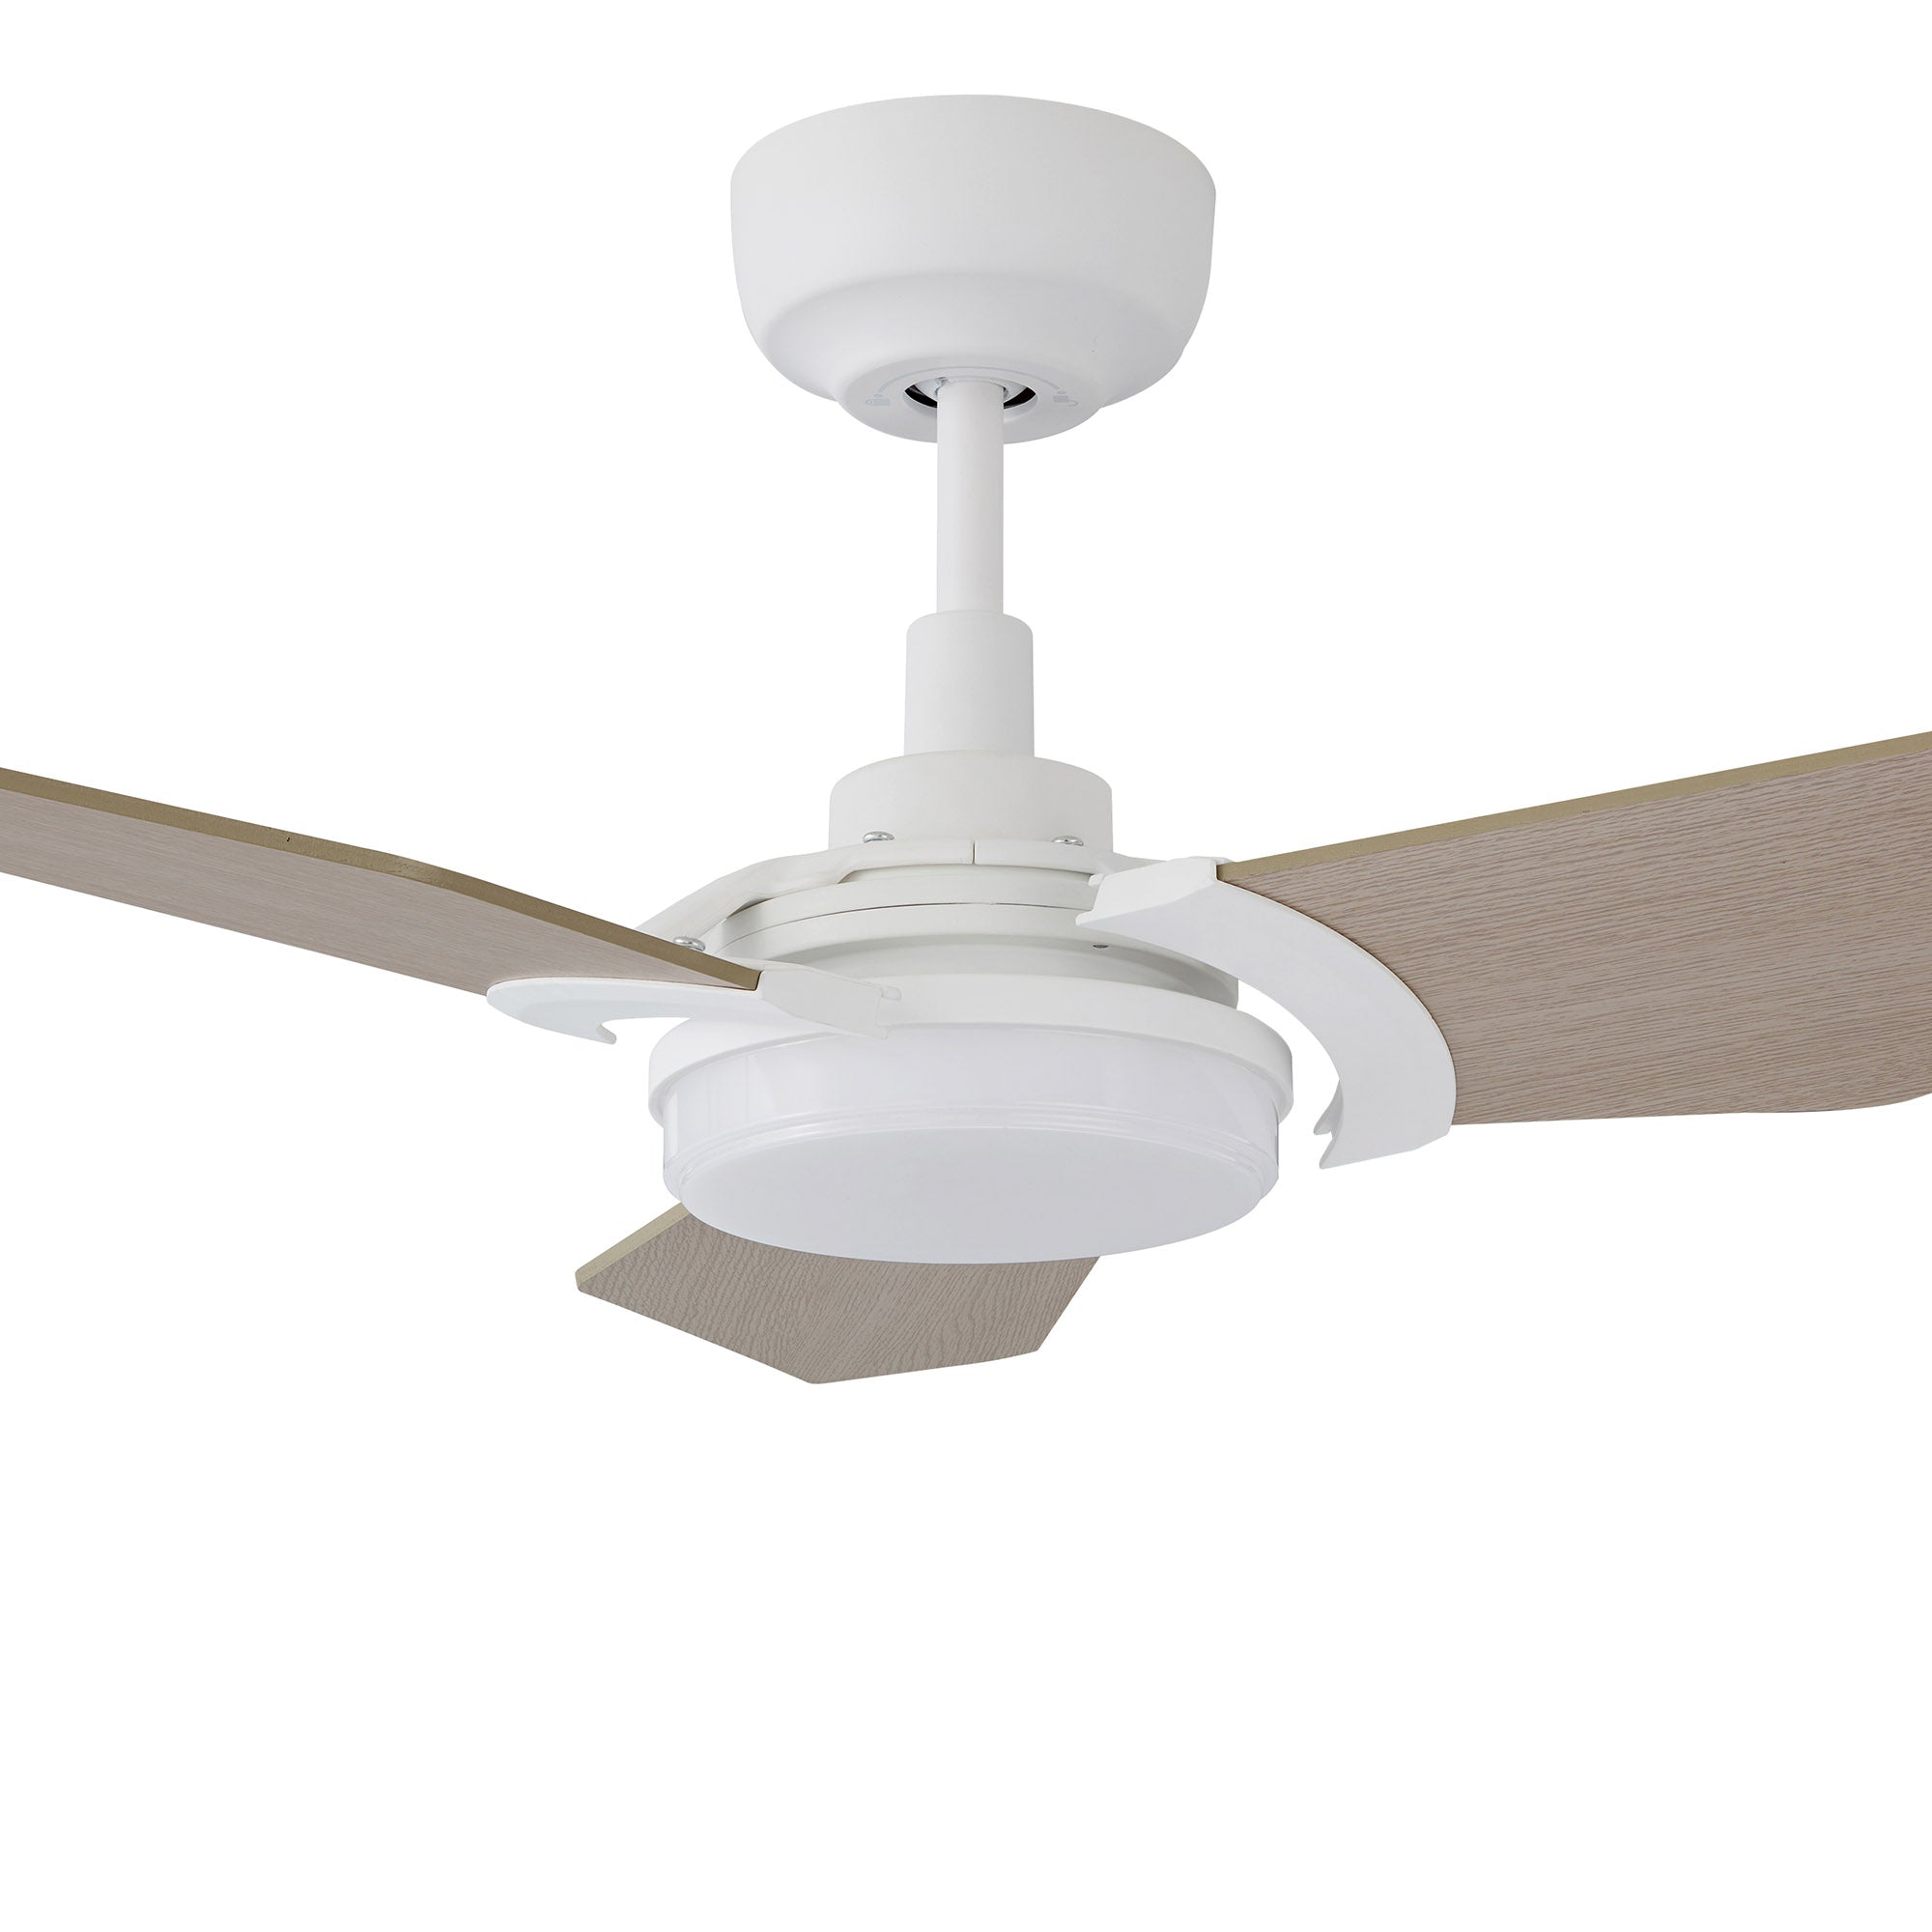 The Smafan Trailblazer 56&#39;&#39; Smart Fan’s sleek and stylish design fits perfectly with any décor trend. With a fully dimmable, and energy-efficient LED kit, whisper-quiet operation, compatible with Alexa, Google Assistant, Sir, carrohome app, easy install, Trailblazer helps you have a smarter way to stay cool.